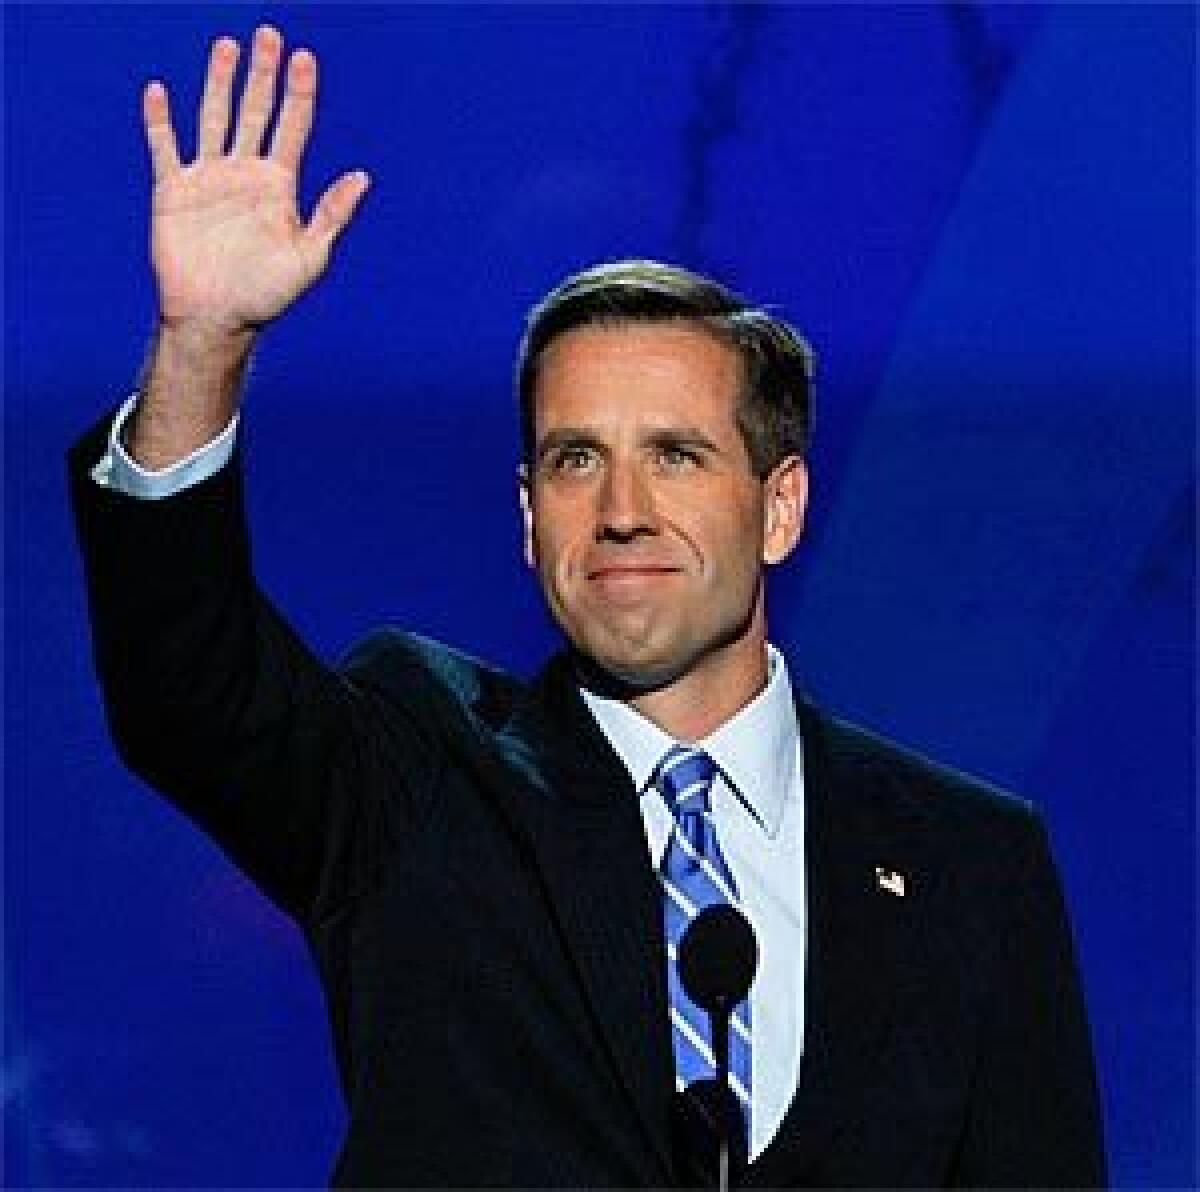 Beau Biden appears at the 2008 Democratic National Convention.